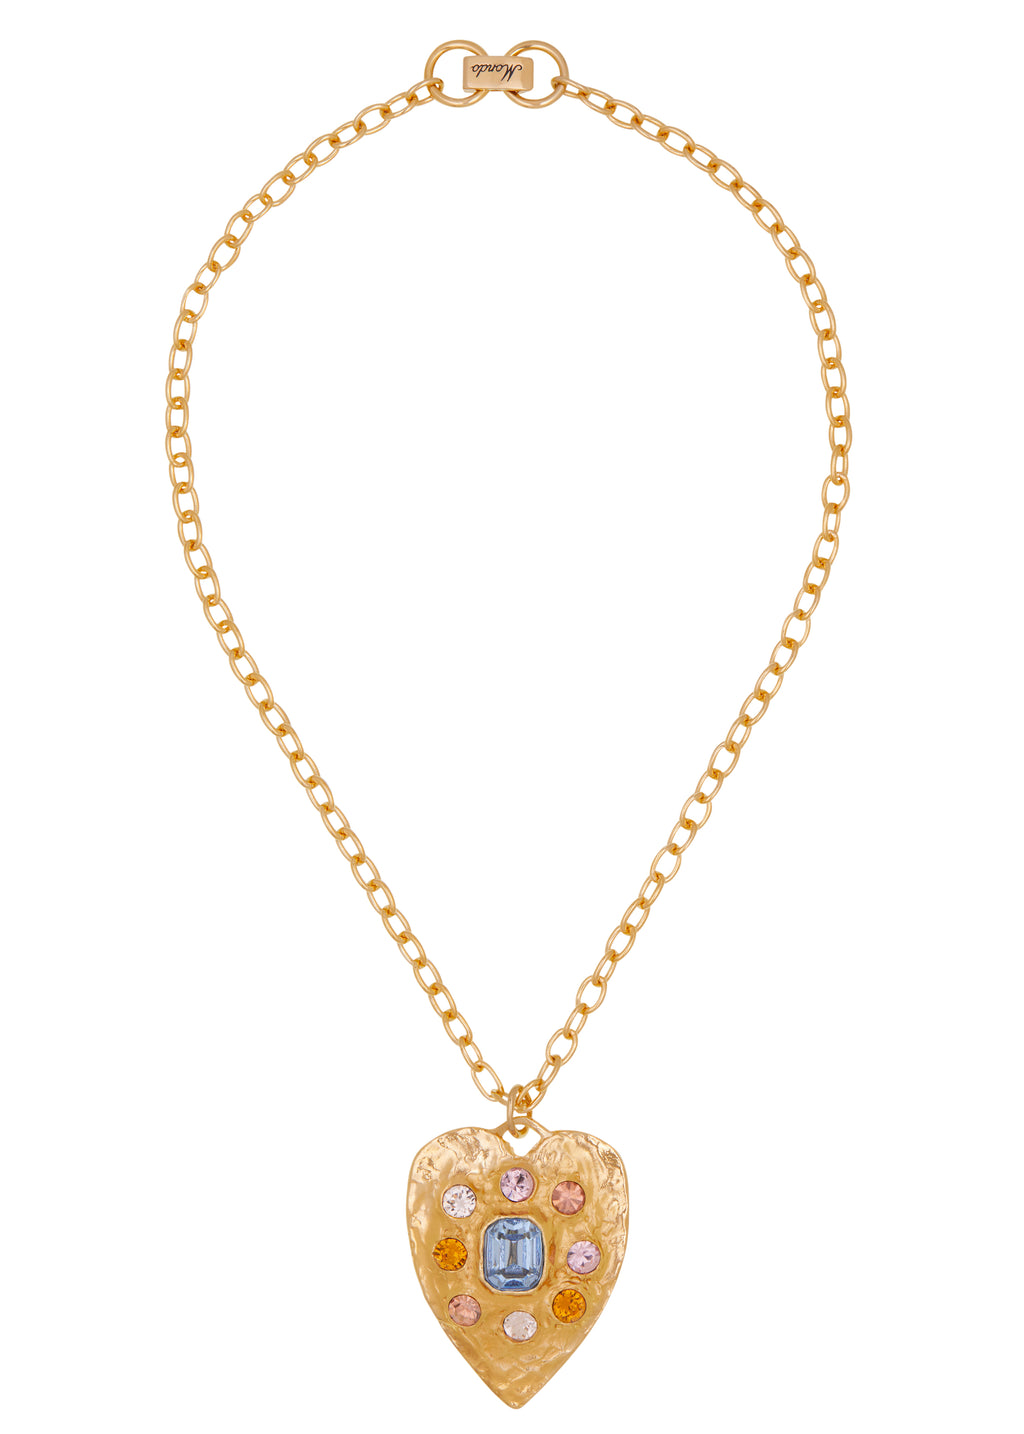 Tropicana Necklace in Gold - Light Blue